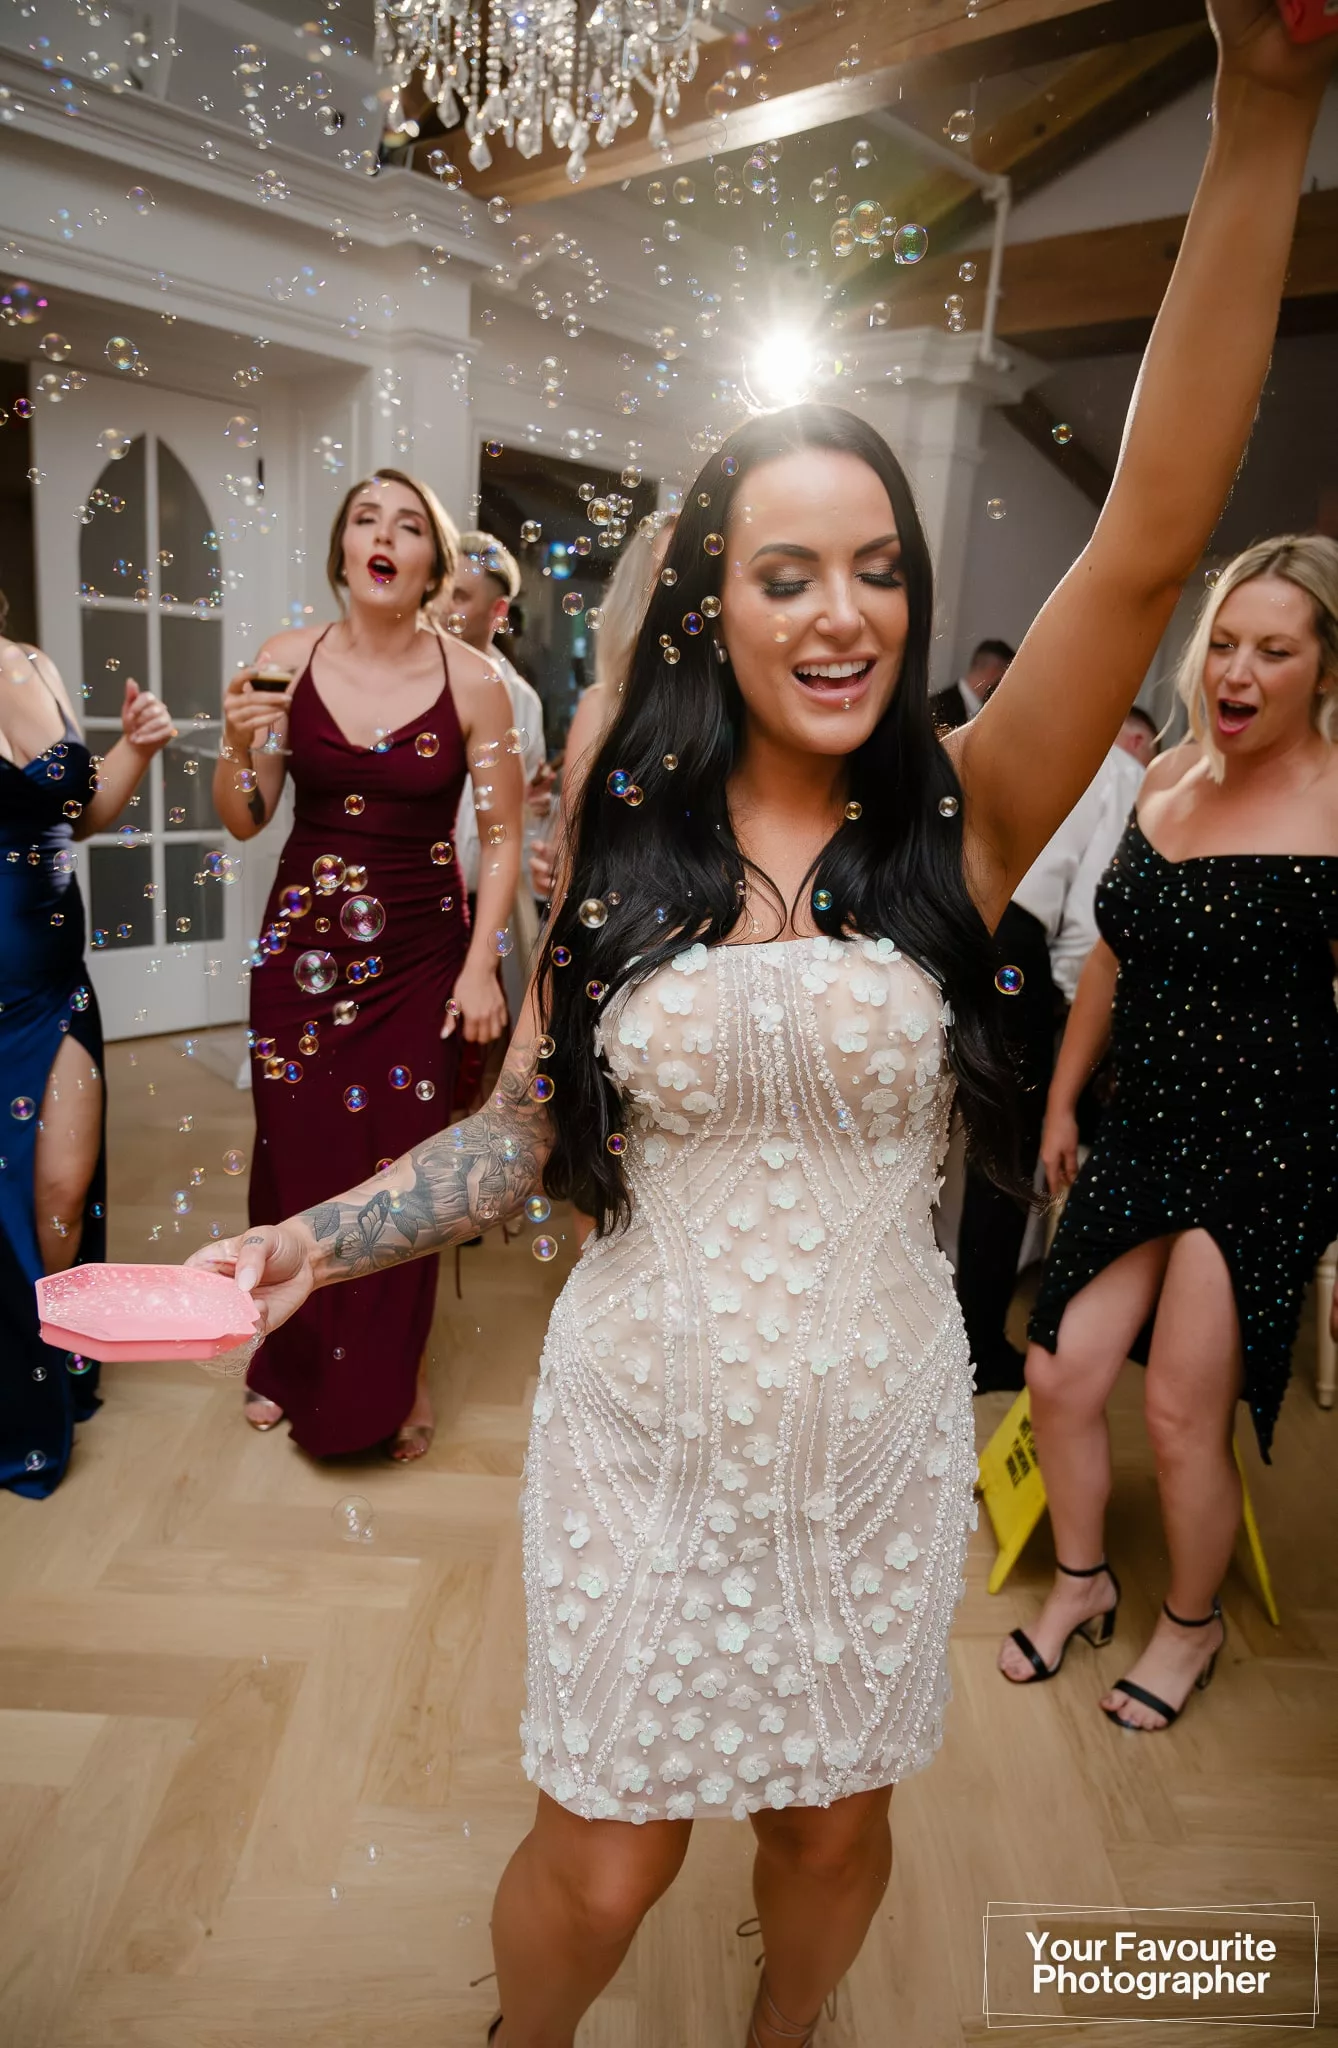 Bride Samantha uses a bubble gun to spray bubbles around the dance floor at her wedding reception